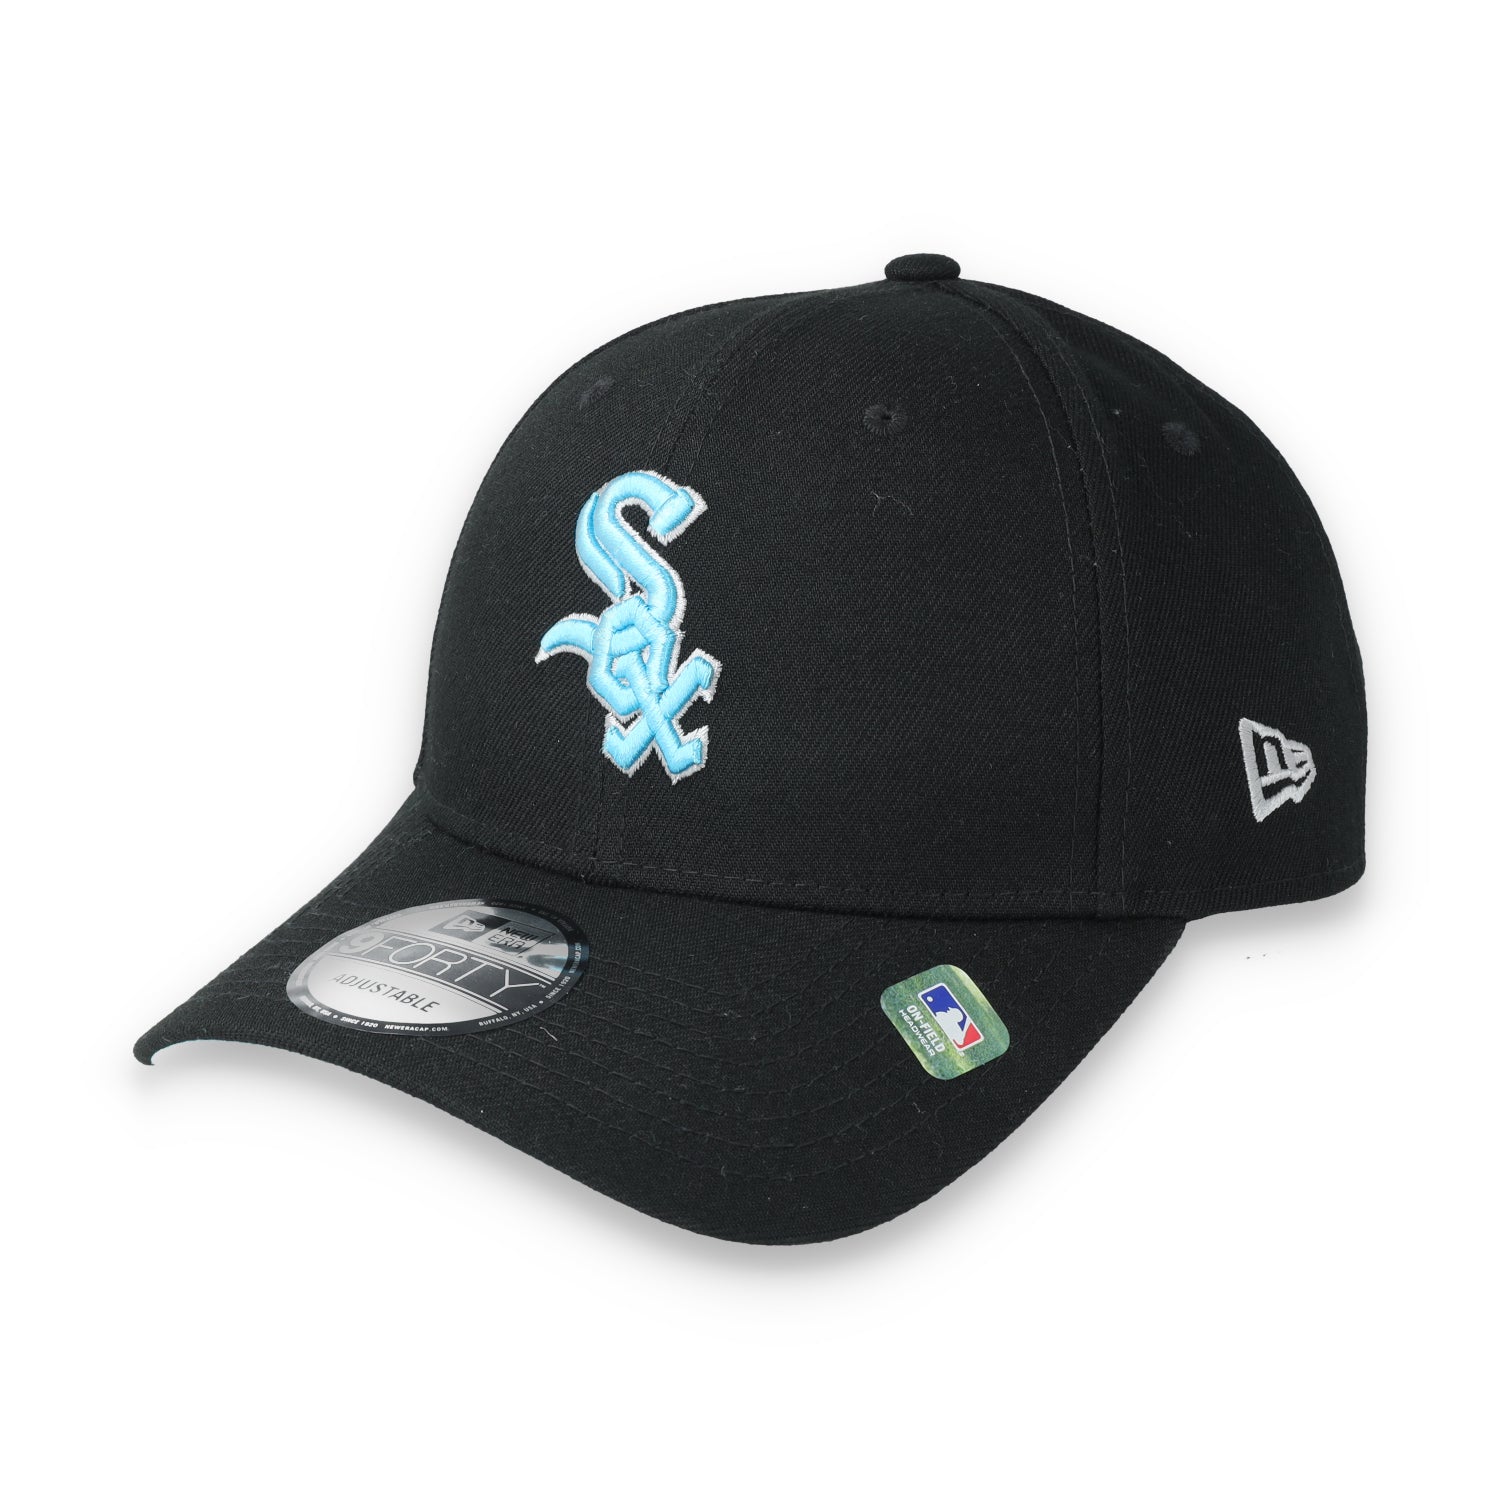 New Era Chicago White Sox Father's Day 9FORTY Adjustable Hat